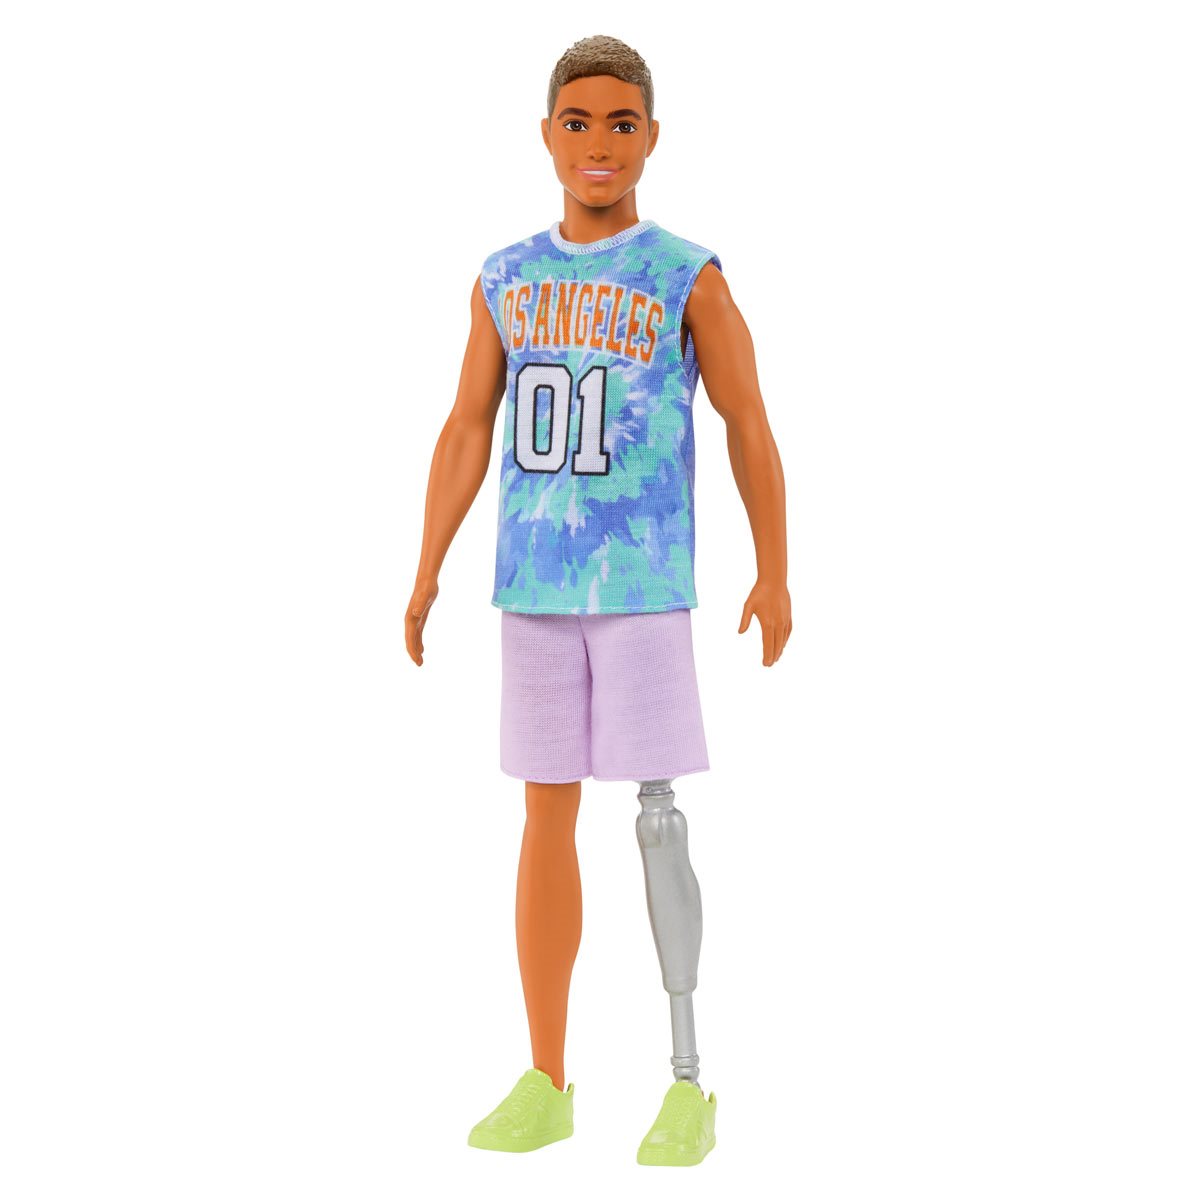 Ken Fashionista Doll #212 with Jersey